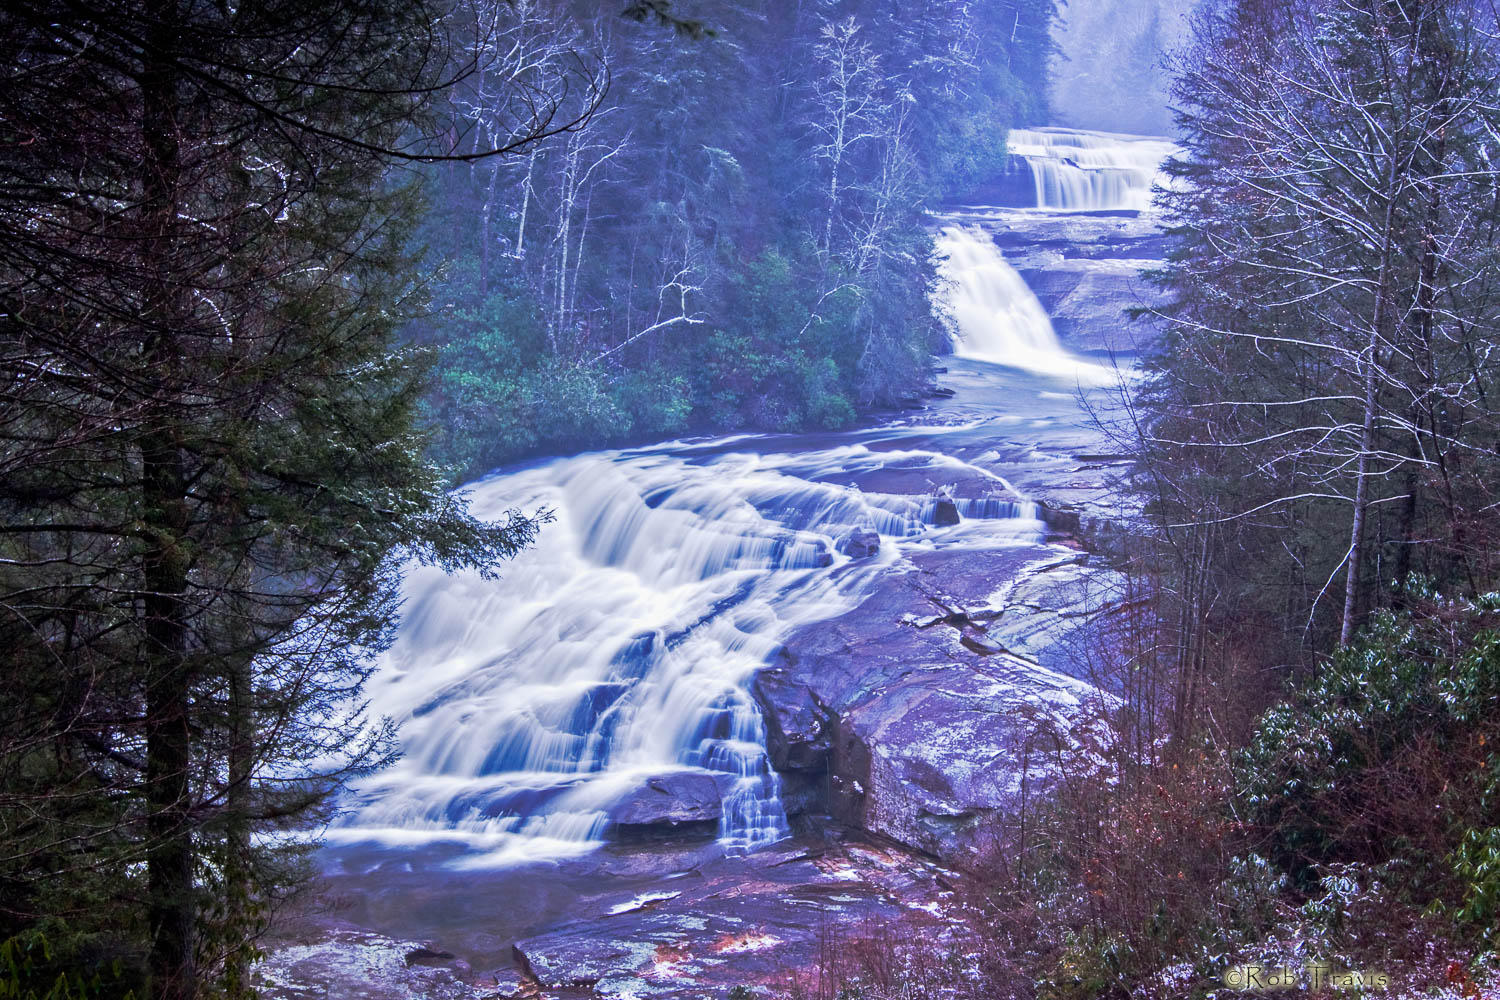 Triple Falls, DuPont Forest - Winter setting in...